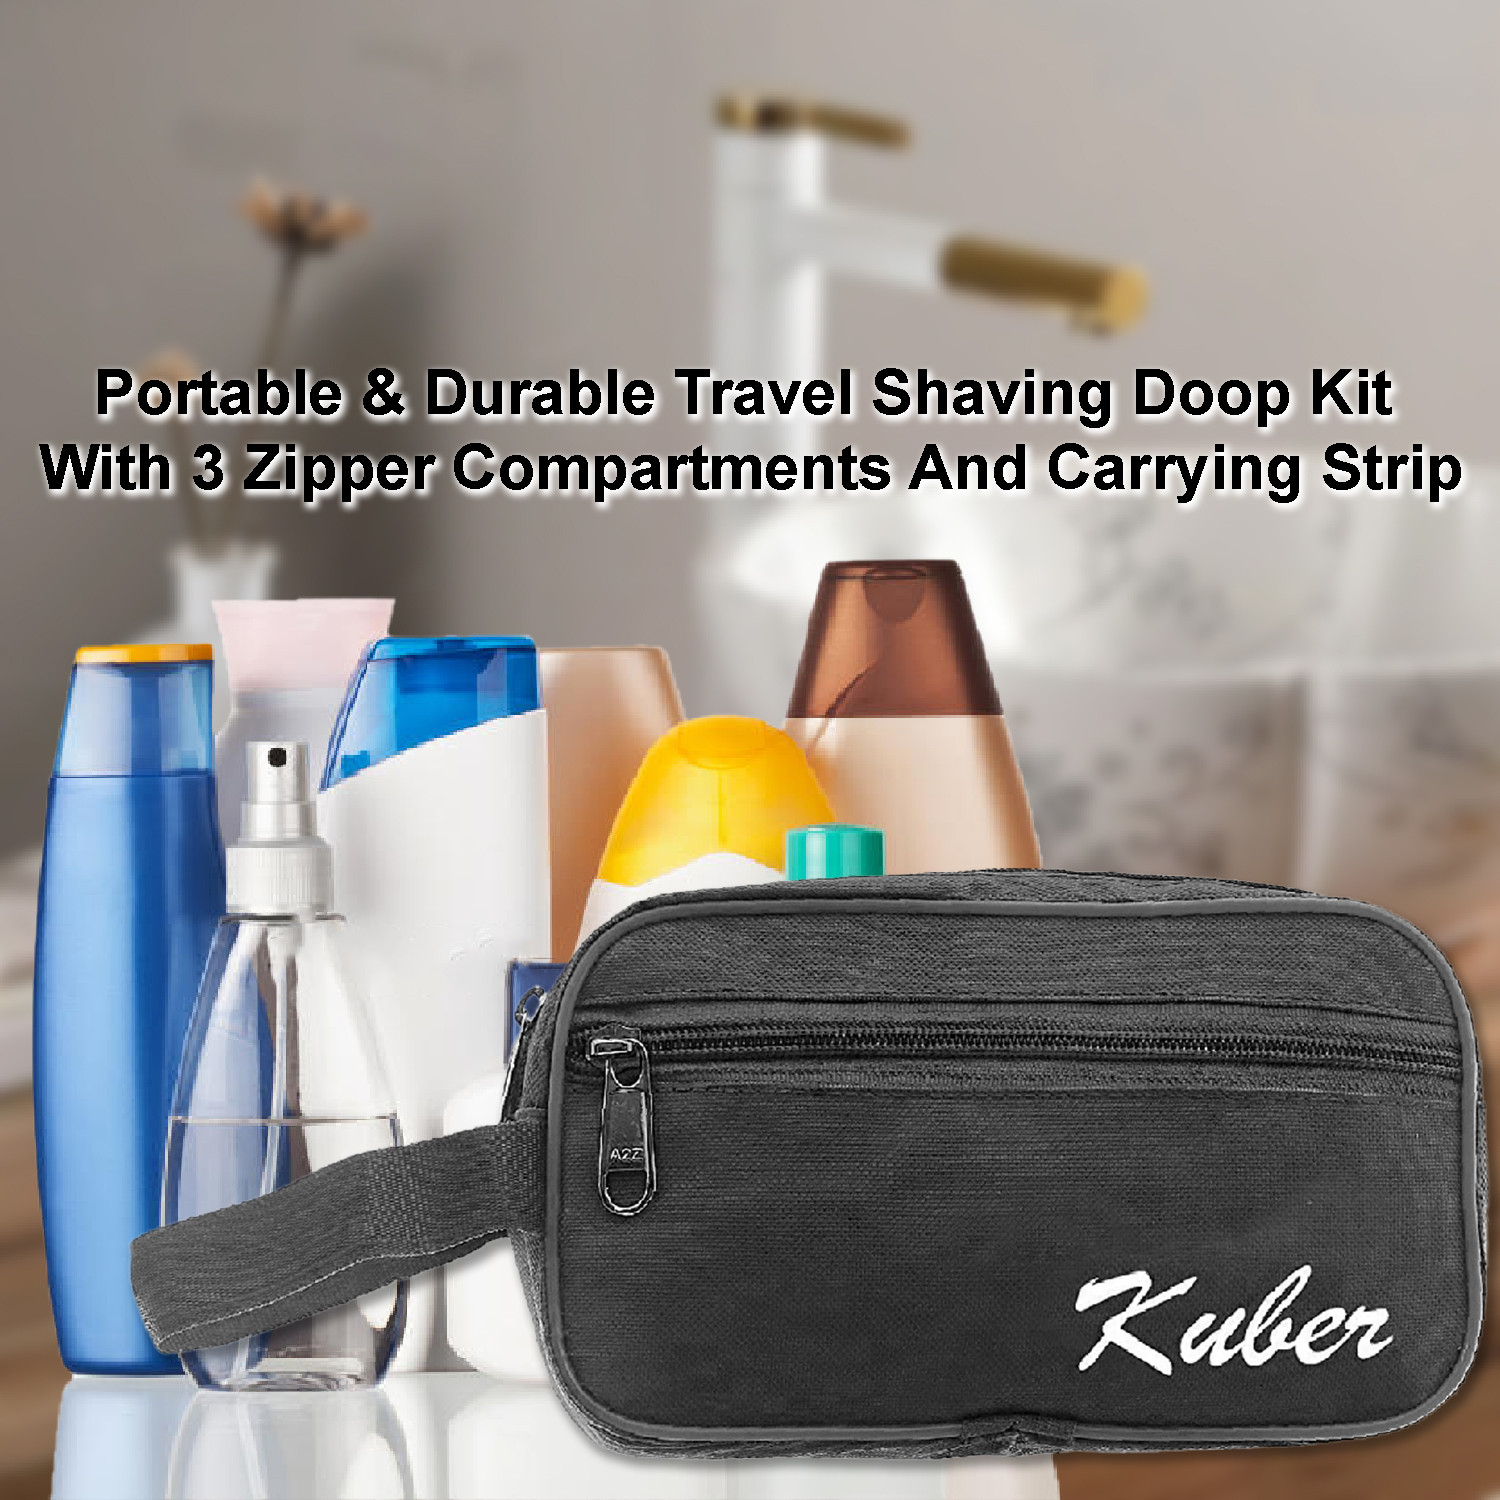 Kuber Industries Canvas Toiletry Organizer|Waterproof & Portable Travel Shaving Dopp Kit With 2 Main ComparMants And Front Zipper (Black)